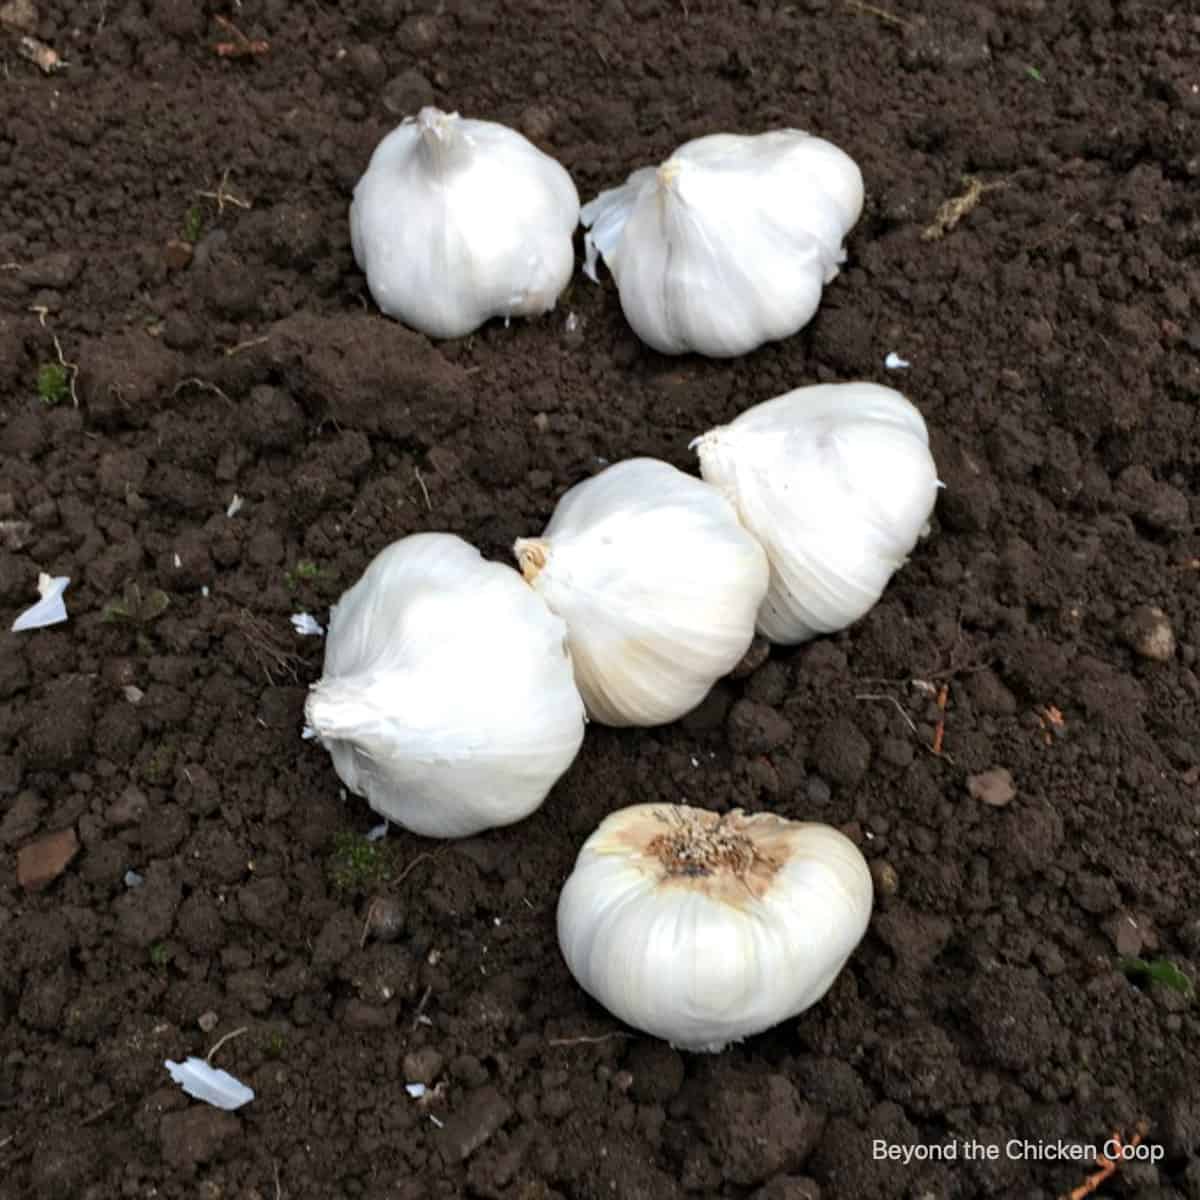 How to prepare garlic for planting?